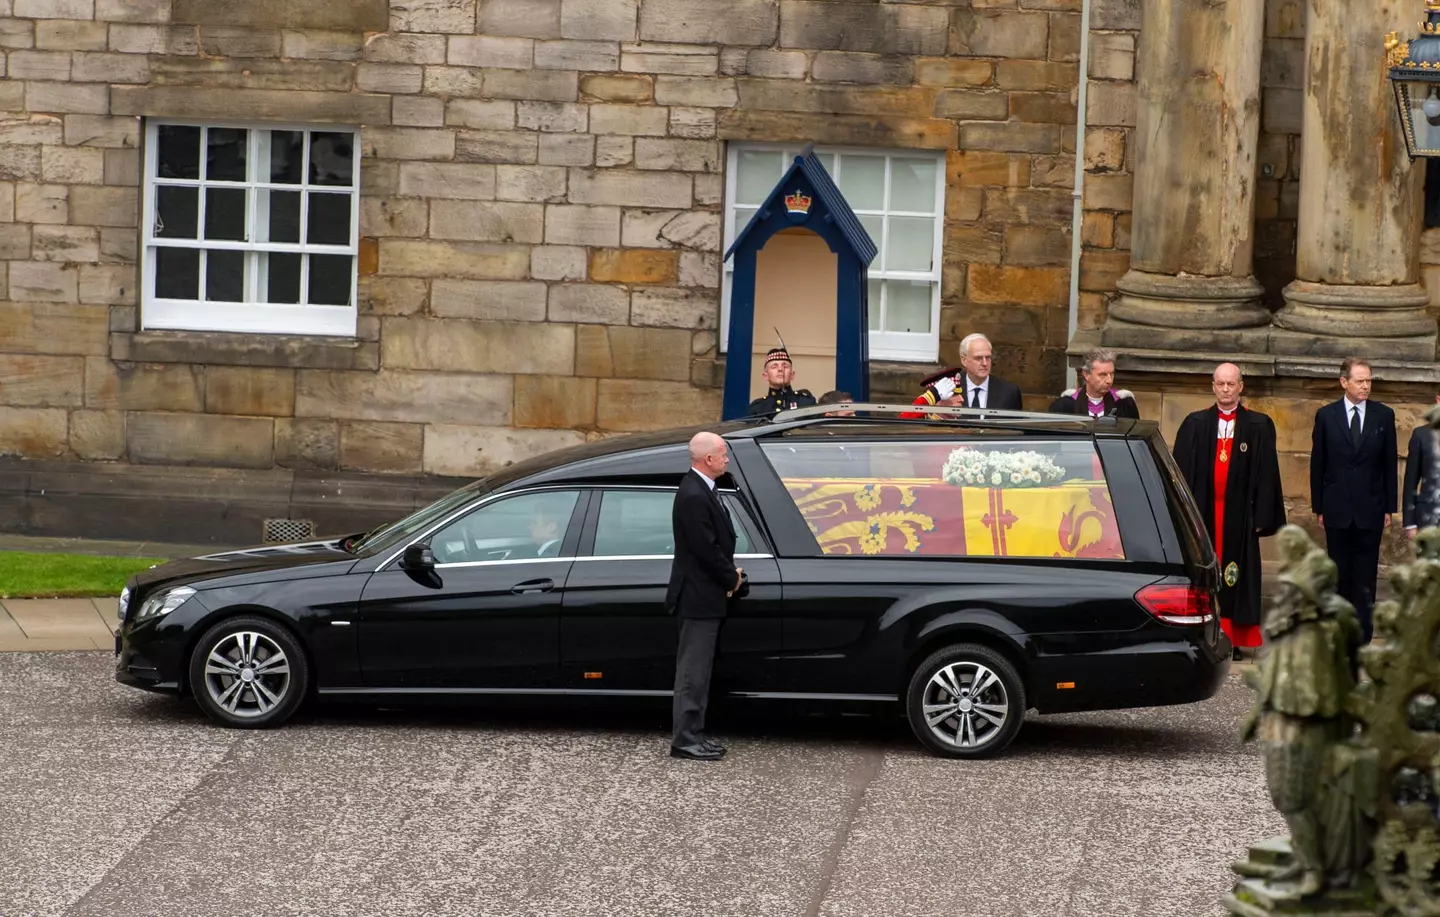 The Queen's coffin was transported to Edinburgh from Balmoral.